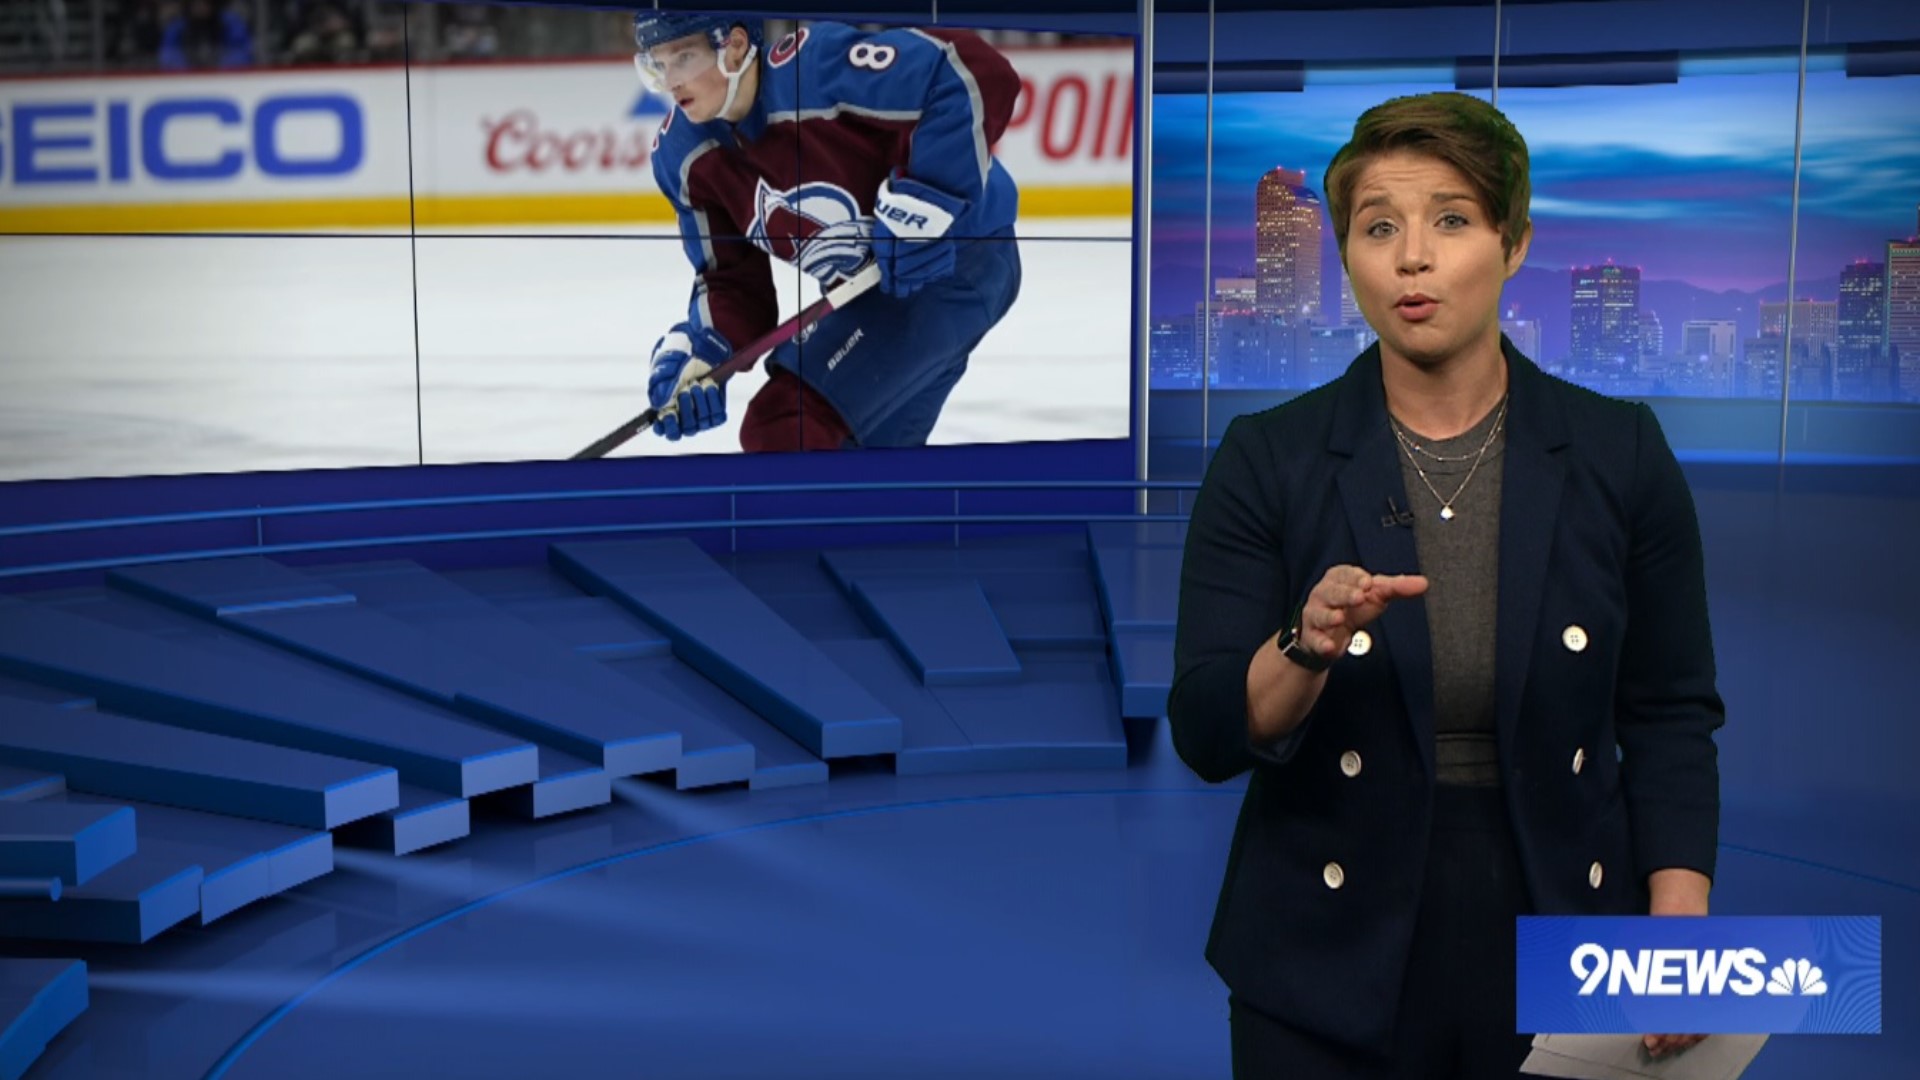 9NEWS Sports Reporter Arielle Orsuto says the Colorado Avalanche are equipped with the right pieces to make a deeper playoff run than recent years.